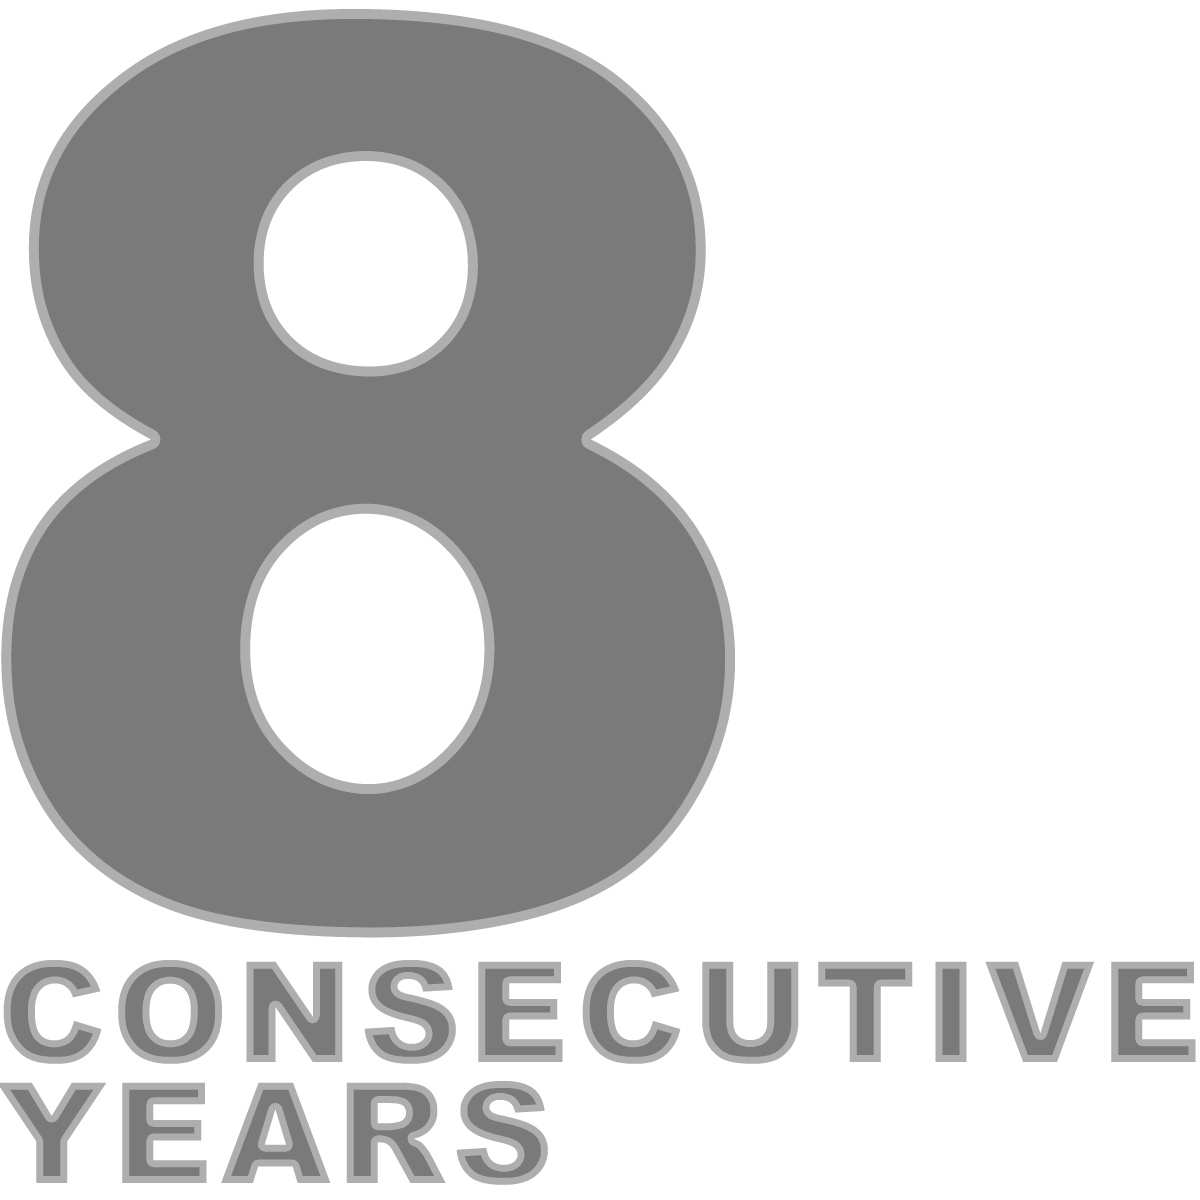 Eight Consecutive Years